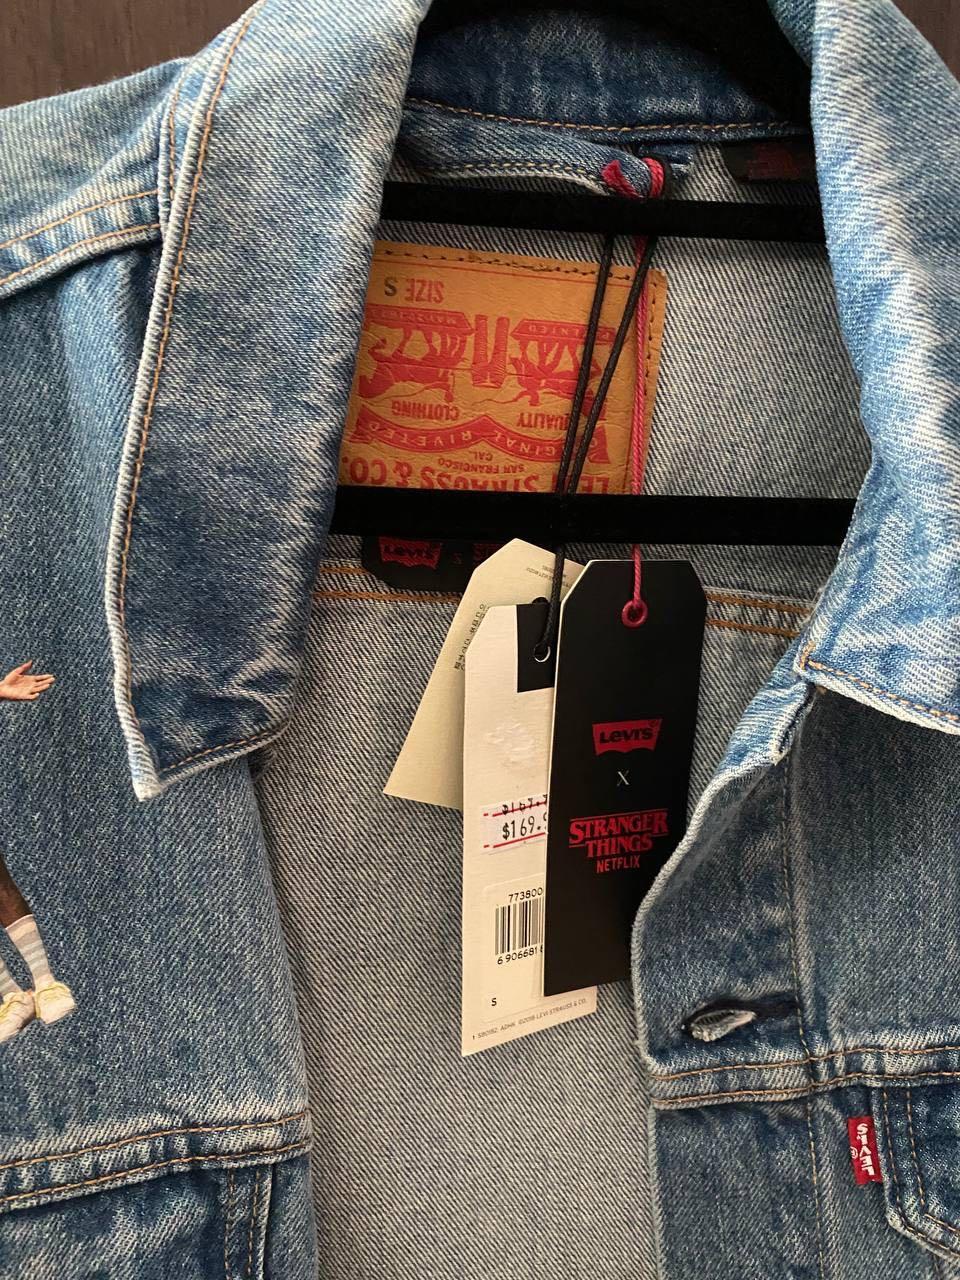 Unisex Levis x Stranger Things Denim Jacket, Men's Fashion, Coats, Jackets  and Outerwear on Carousell